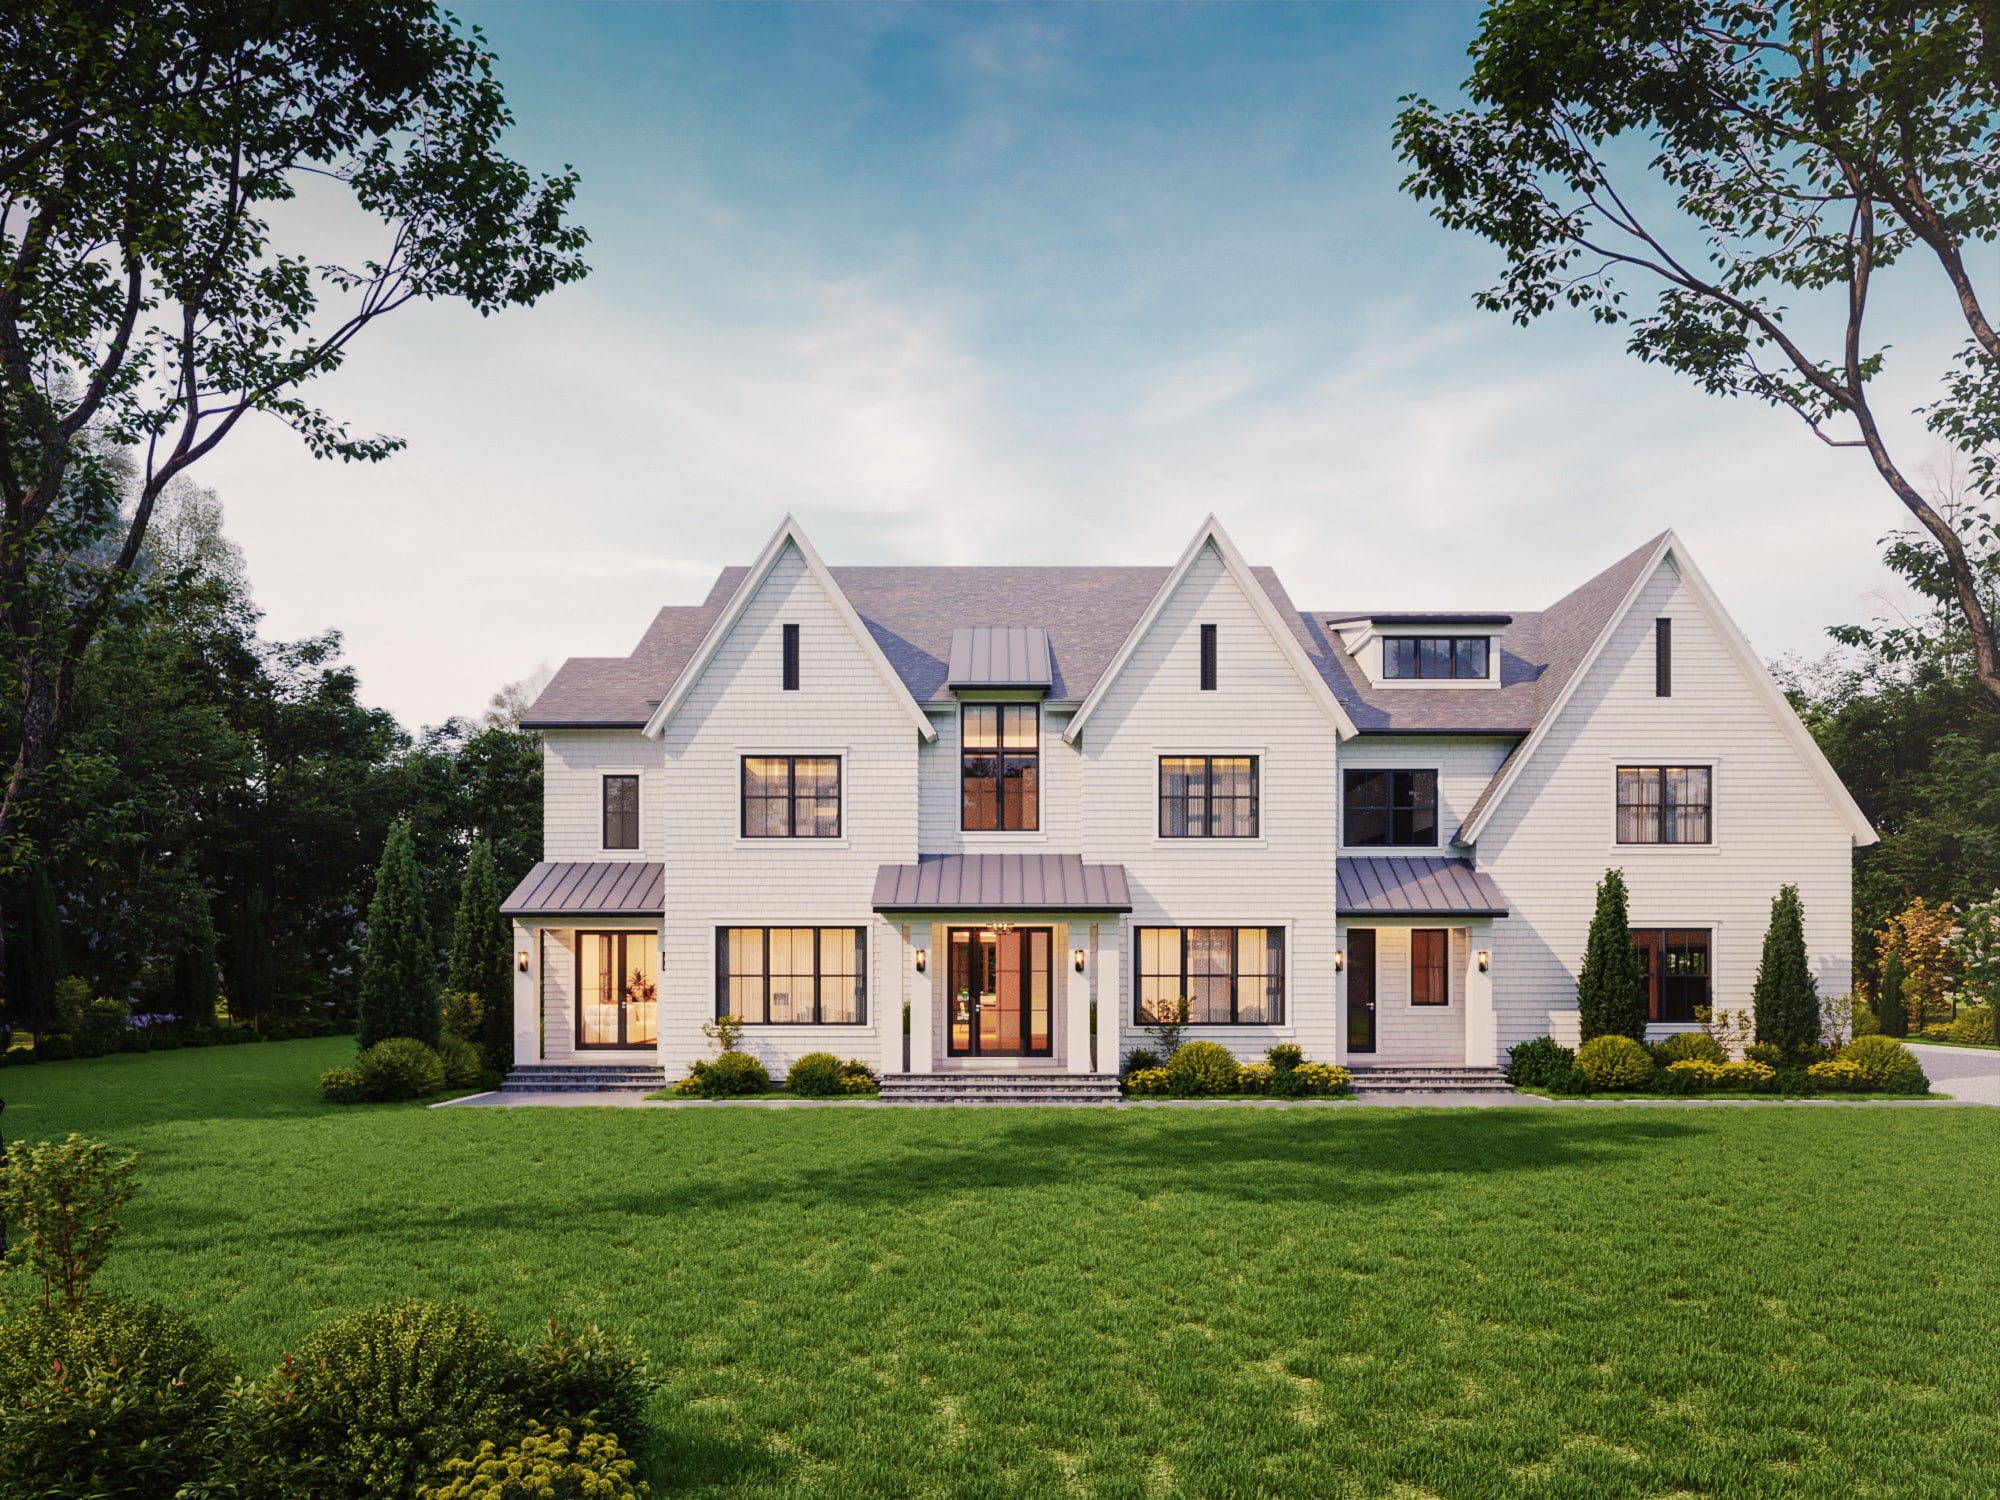 Exterior 3D Architectural Rendering (New Canaan, Fairfield County, Connecticut)